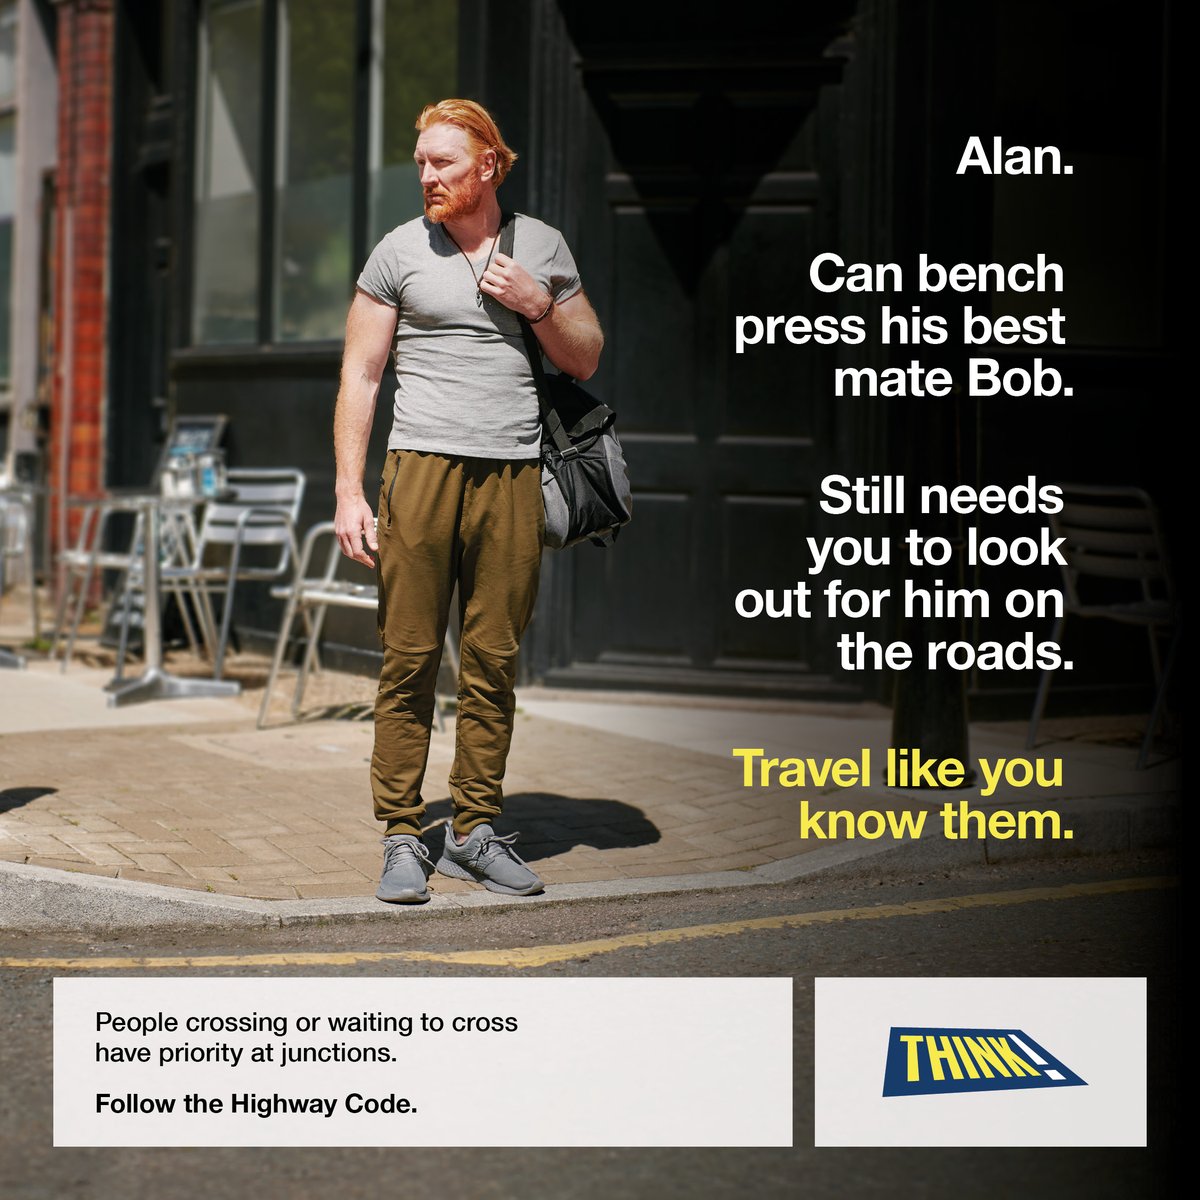 Whoever you meet on the road #TravelLikeYouKnowThem and help keep everyone safe.
orlo.uk/6OdAC